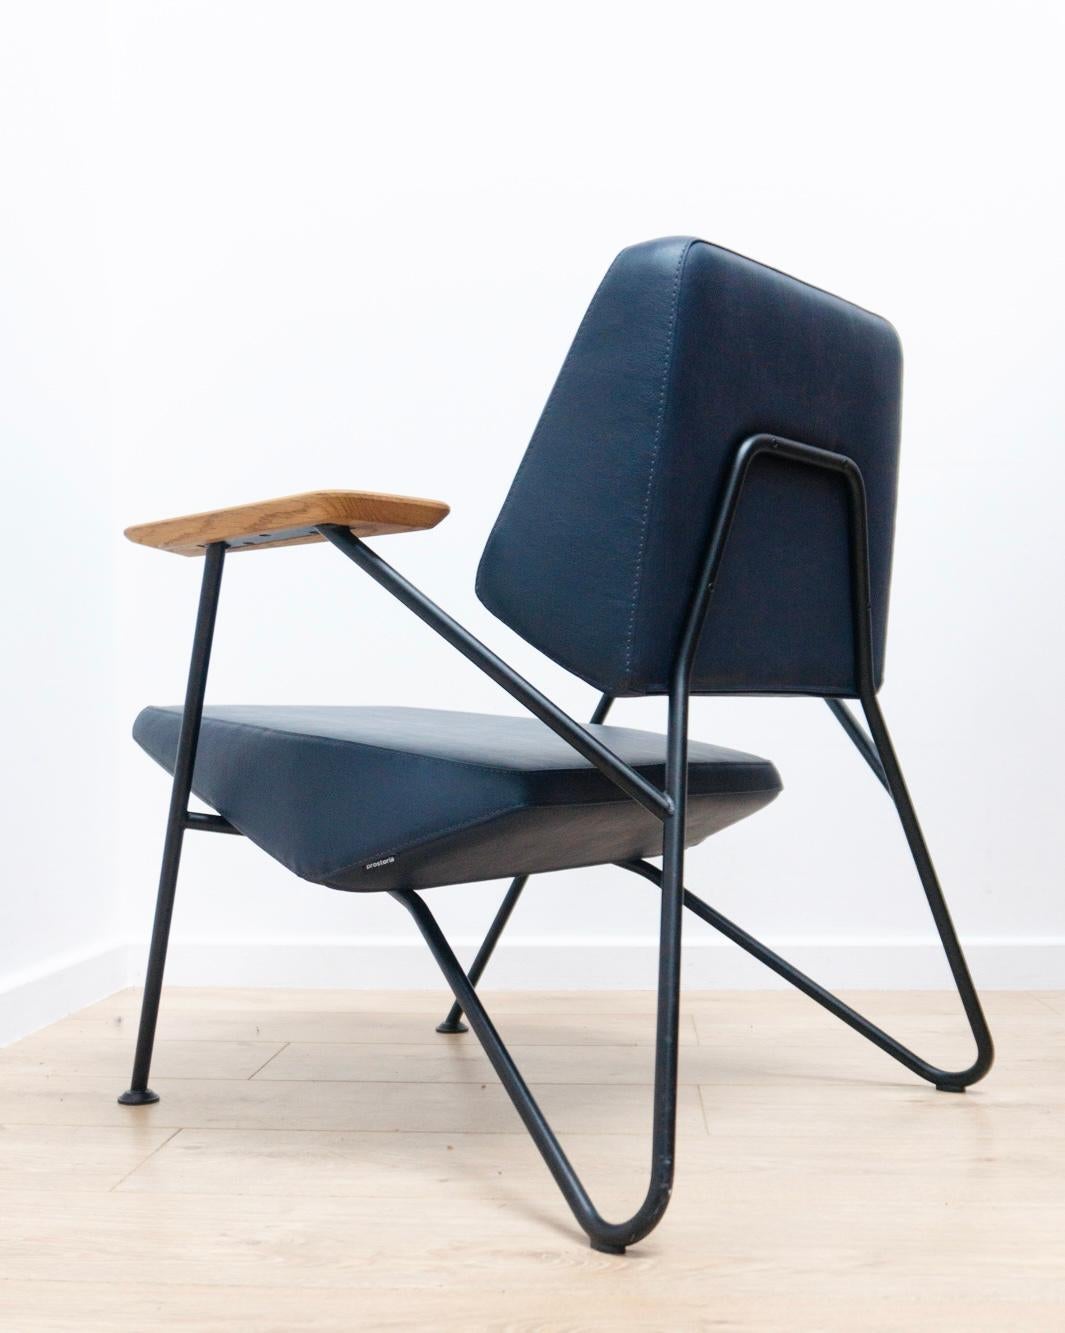 Original Modernist Leather Polygon Armchair by Prostoria For Sale 2